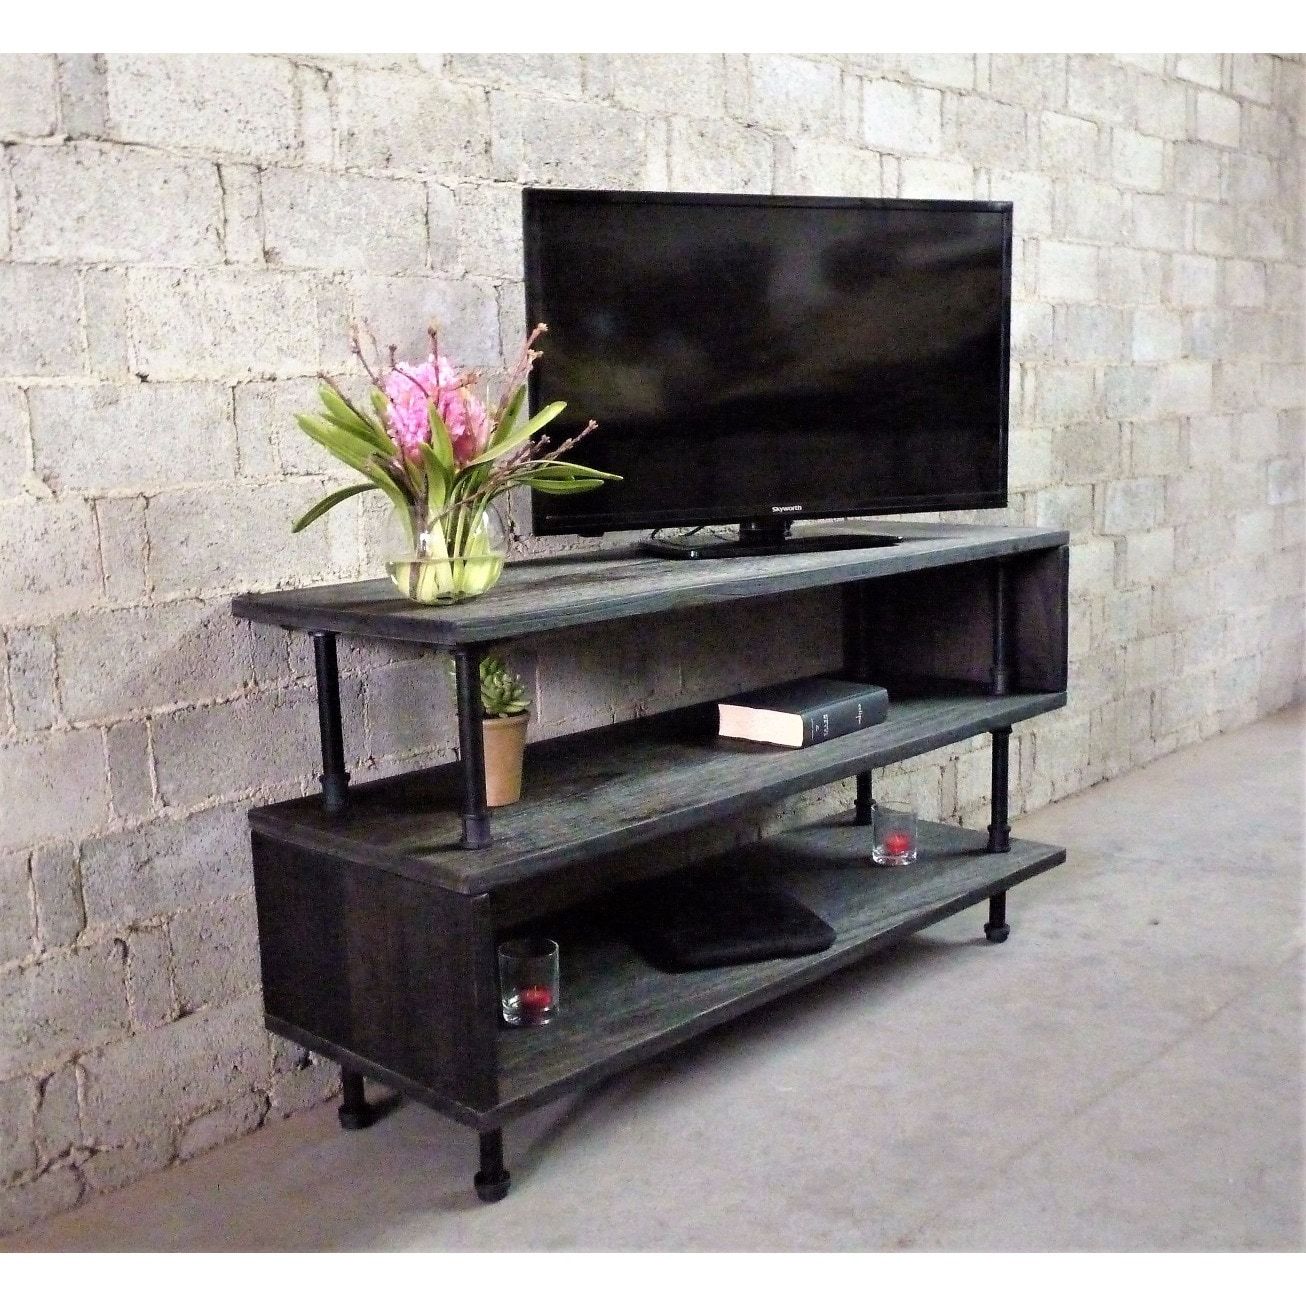 Tucson Modern Industrial Tv Stand Living Room Rec Room Within Reclaimed Wood And Metal Tv Stands (View 6 of 15)